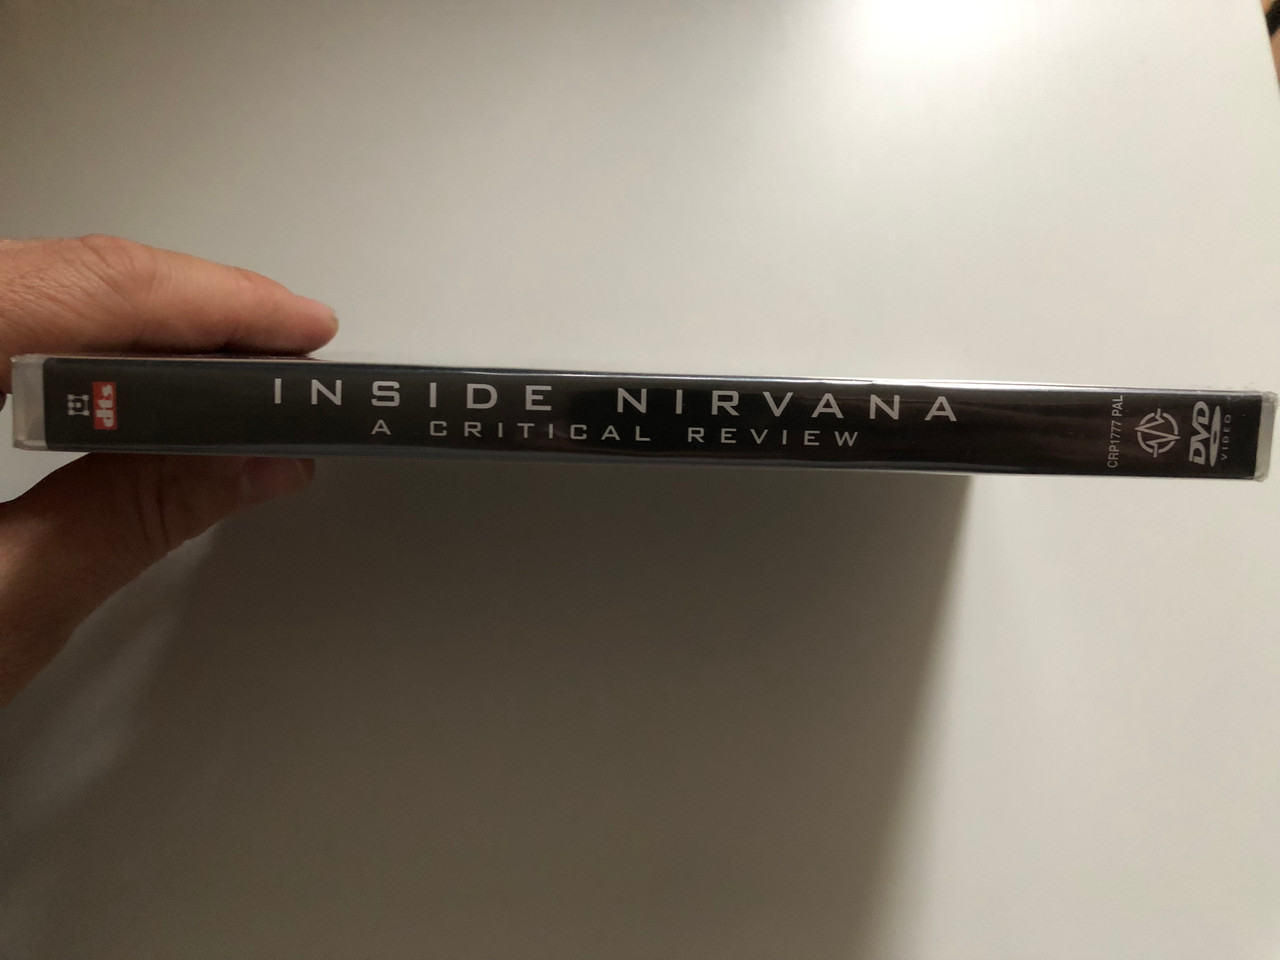 https://cdn10.bigcommerce.com/s-62bdpkt7pb/products/0/images/271594/Inside_Nirvana_An_Independent_Critical_Review_-_Featuring_Live_Archive_Footage_Previously_Unavailable_On_DVD_Classic_Rock_Productions_DVD_Video_CD_2004_CRP_1777_PAL_2__35553.1680273781.1280.1280.JPG?c=2&_gl=1*w9j13f*_ga*MjA2NTIxMjE2MC4xNTkwNTEyNTMy*_ga_WS2VZYPC6G*MTY4MDI3MDcyNS44MjguMS4xNjgwMjczNTc5LjMyLjAuMA..